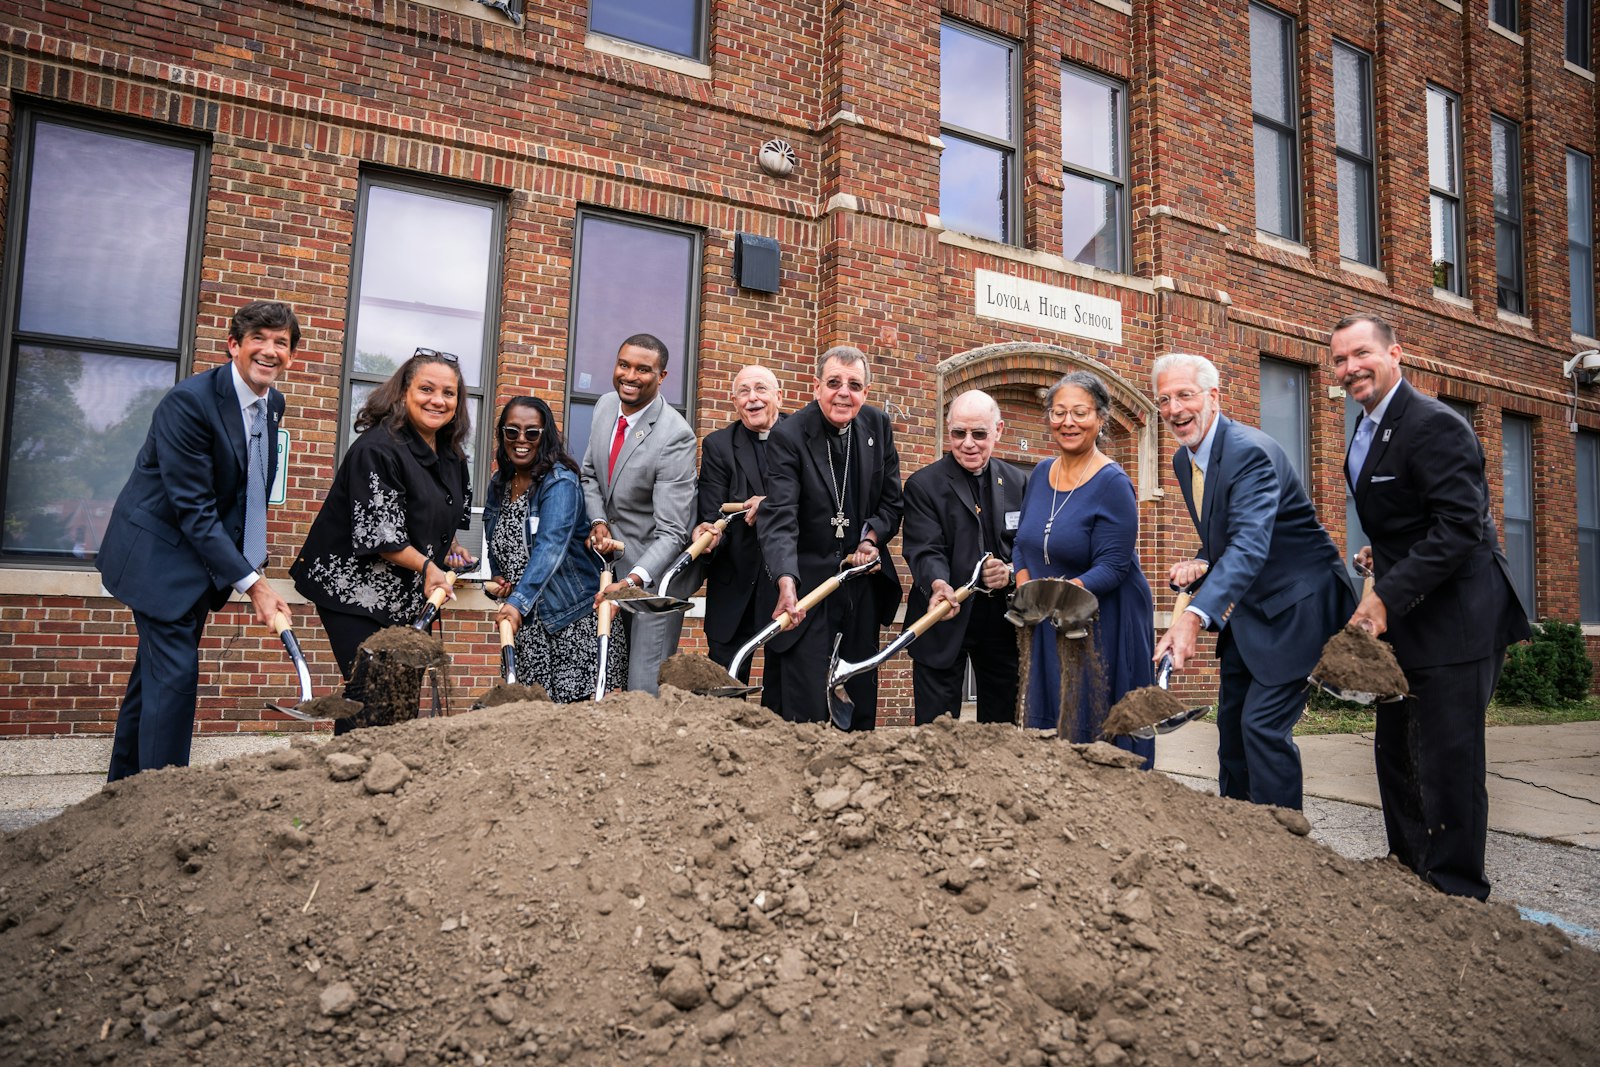 Representatives from Loyola High School, the Midwest Jesuits, Archdiocese of Detroit and the city of Detroit take part in a ceremonial groundbreaking Sept. 13 for Loyola's new St. Peter Claver Chapel, which will be the first new church or chapel built in the city of Detroit since the 1960s.